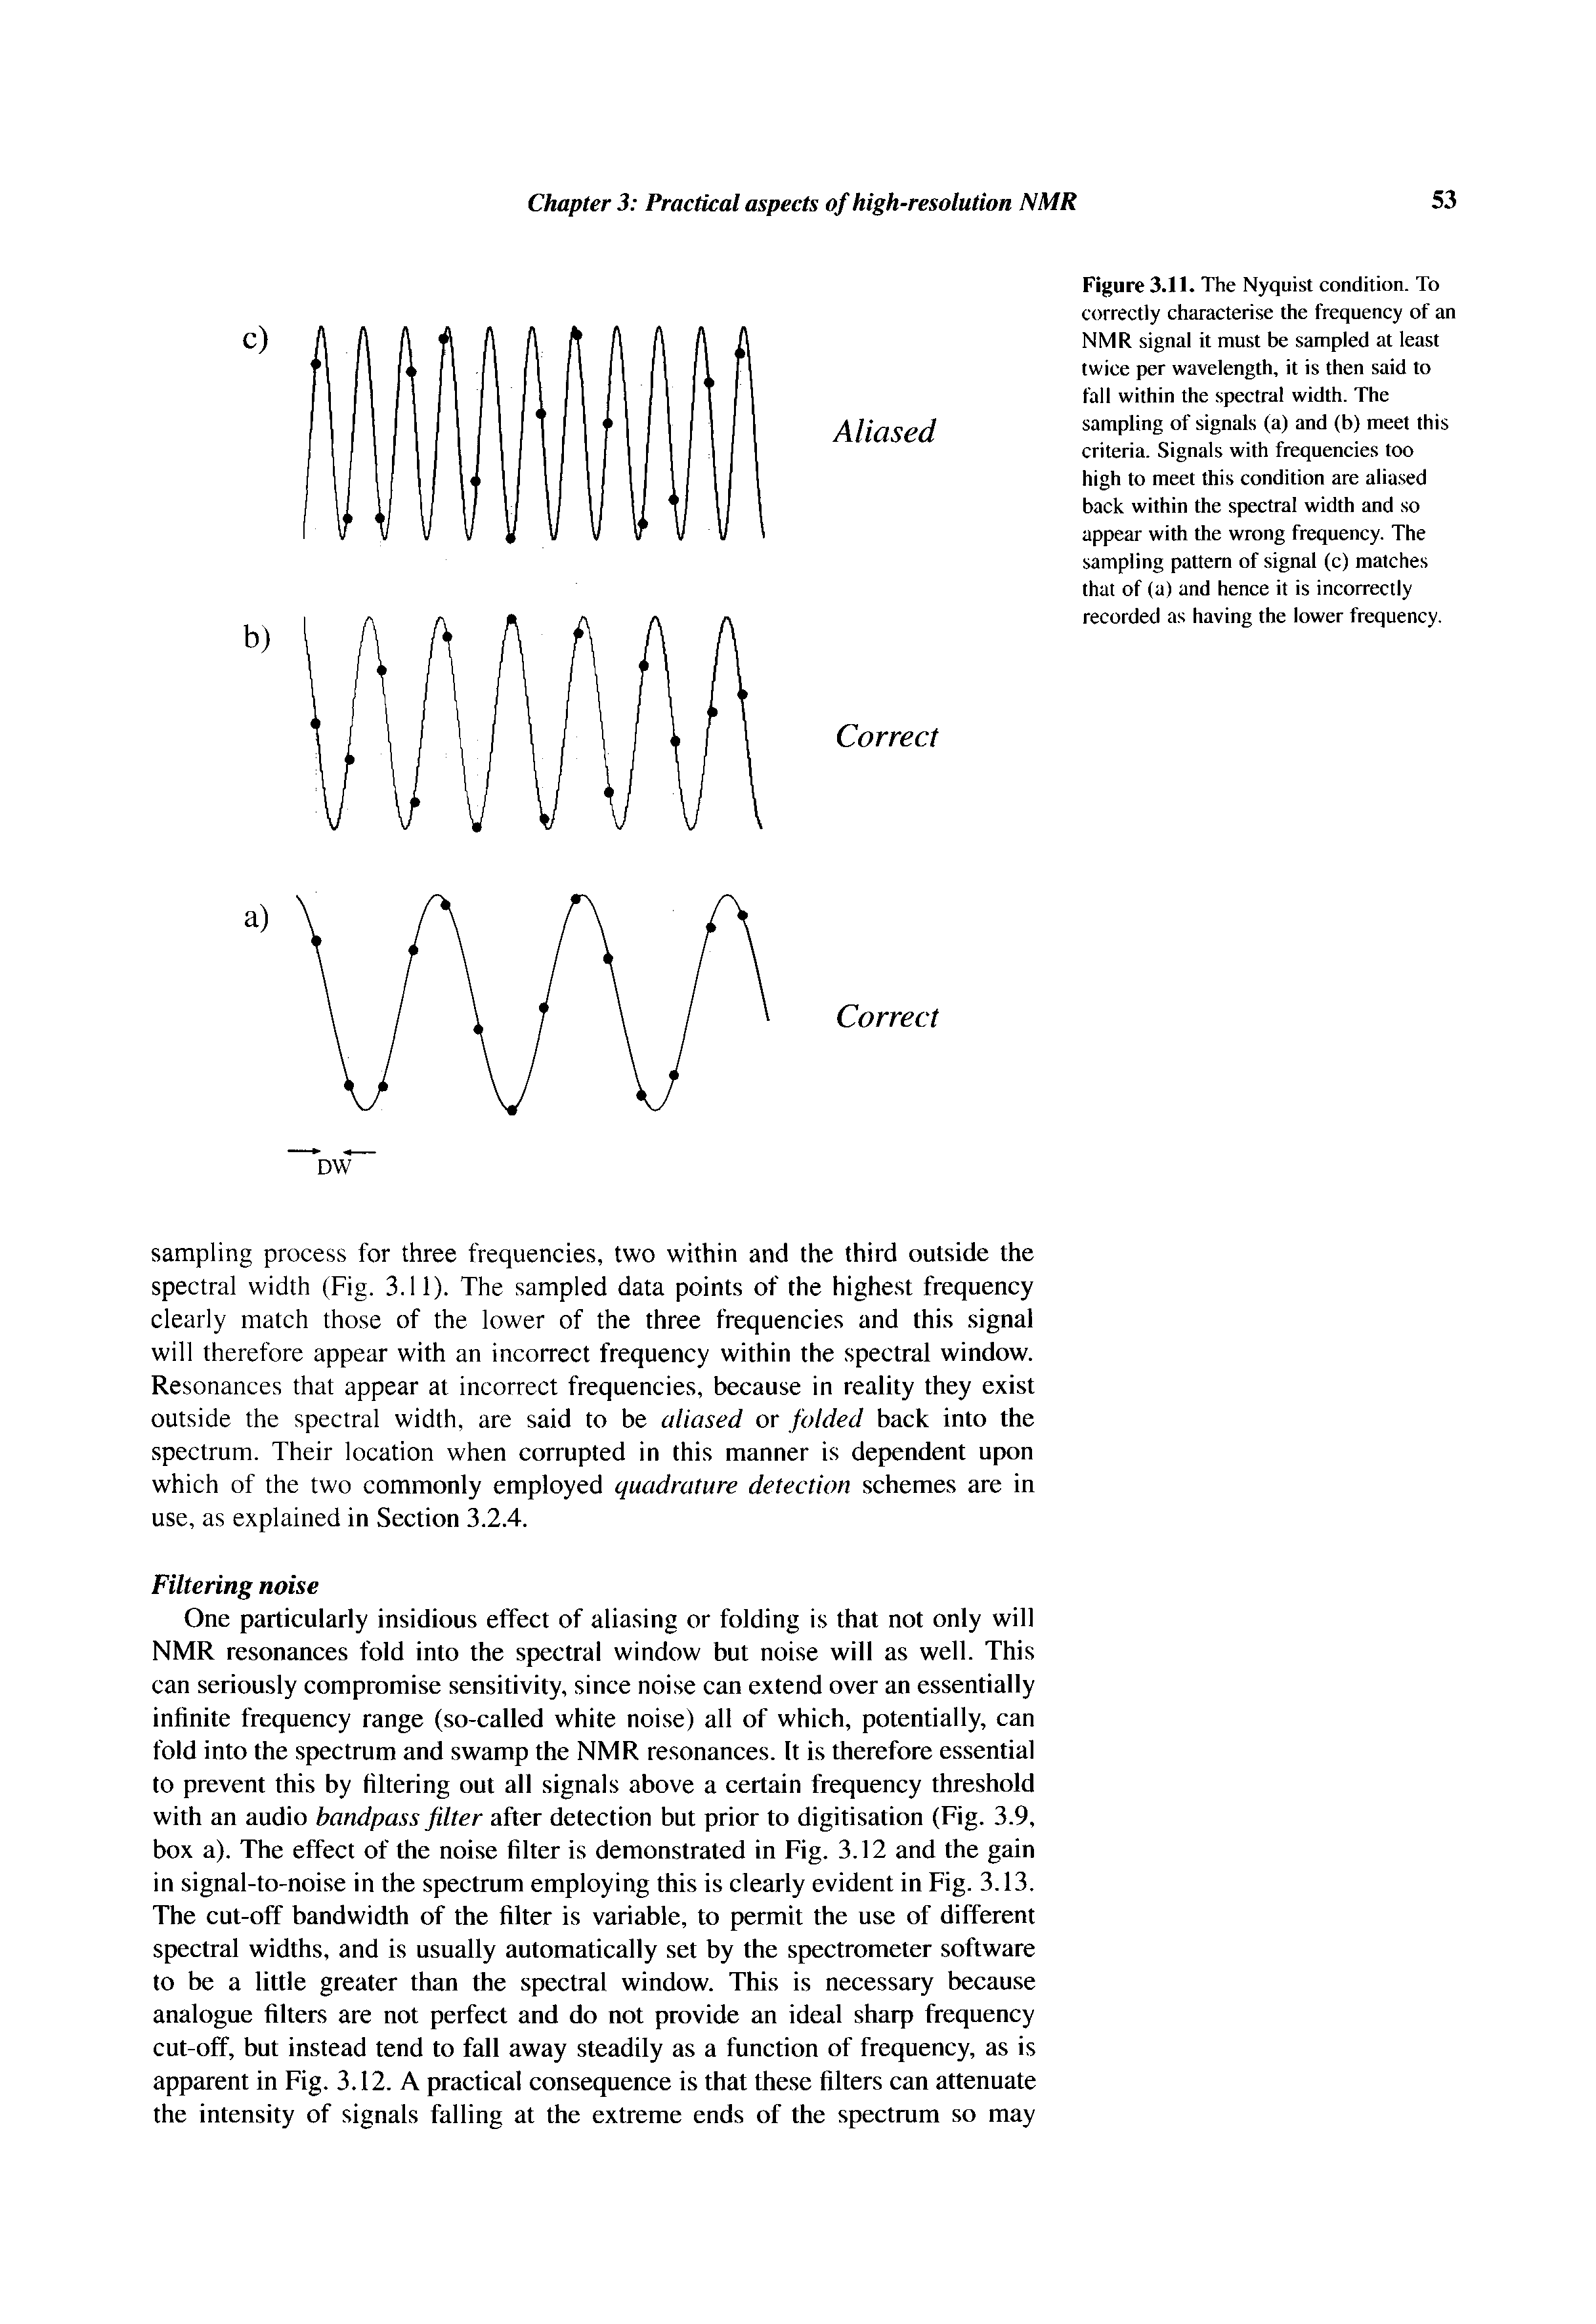 Figure 3.11. The Nyquist condition. To correctly characterise the frequency of an NMR signal it must be sampled at least twice per wavelength, it is then said to fall within the spectral width. The sampling of signals (a) and (b) meet this criteria. Signals with frequencies too high to meet this condition are alia.sed back within the spectral width and so appear with the wrong frequency. The sampling pattern of signal (c) matches that of (a) and hence it is incorrectly recorded as having the lower frequency.